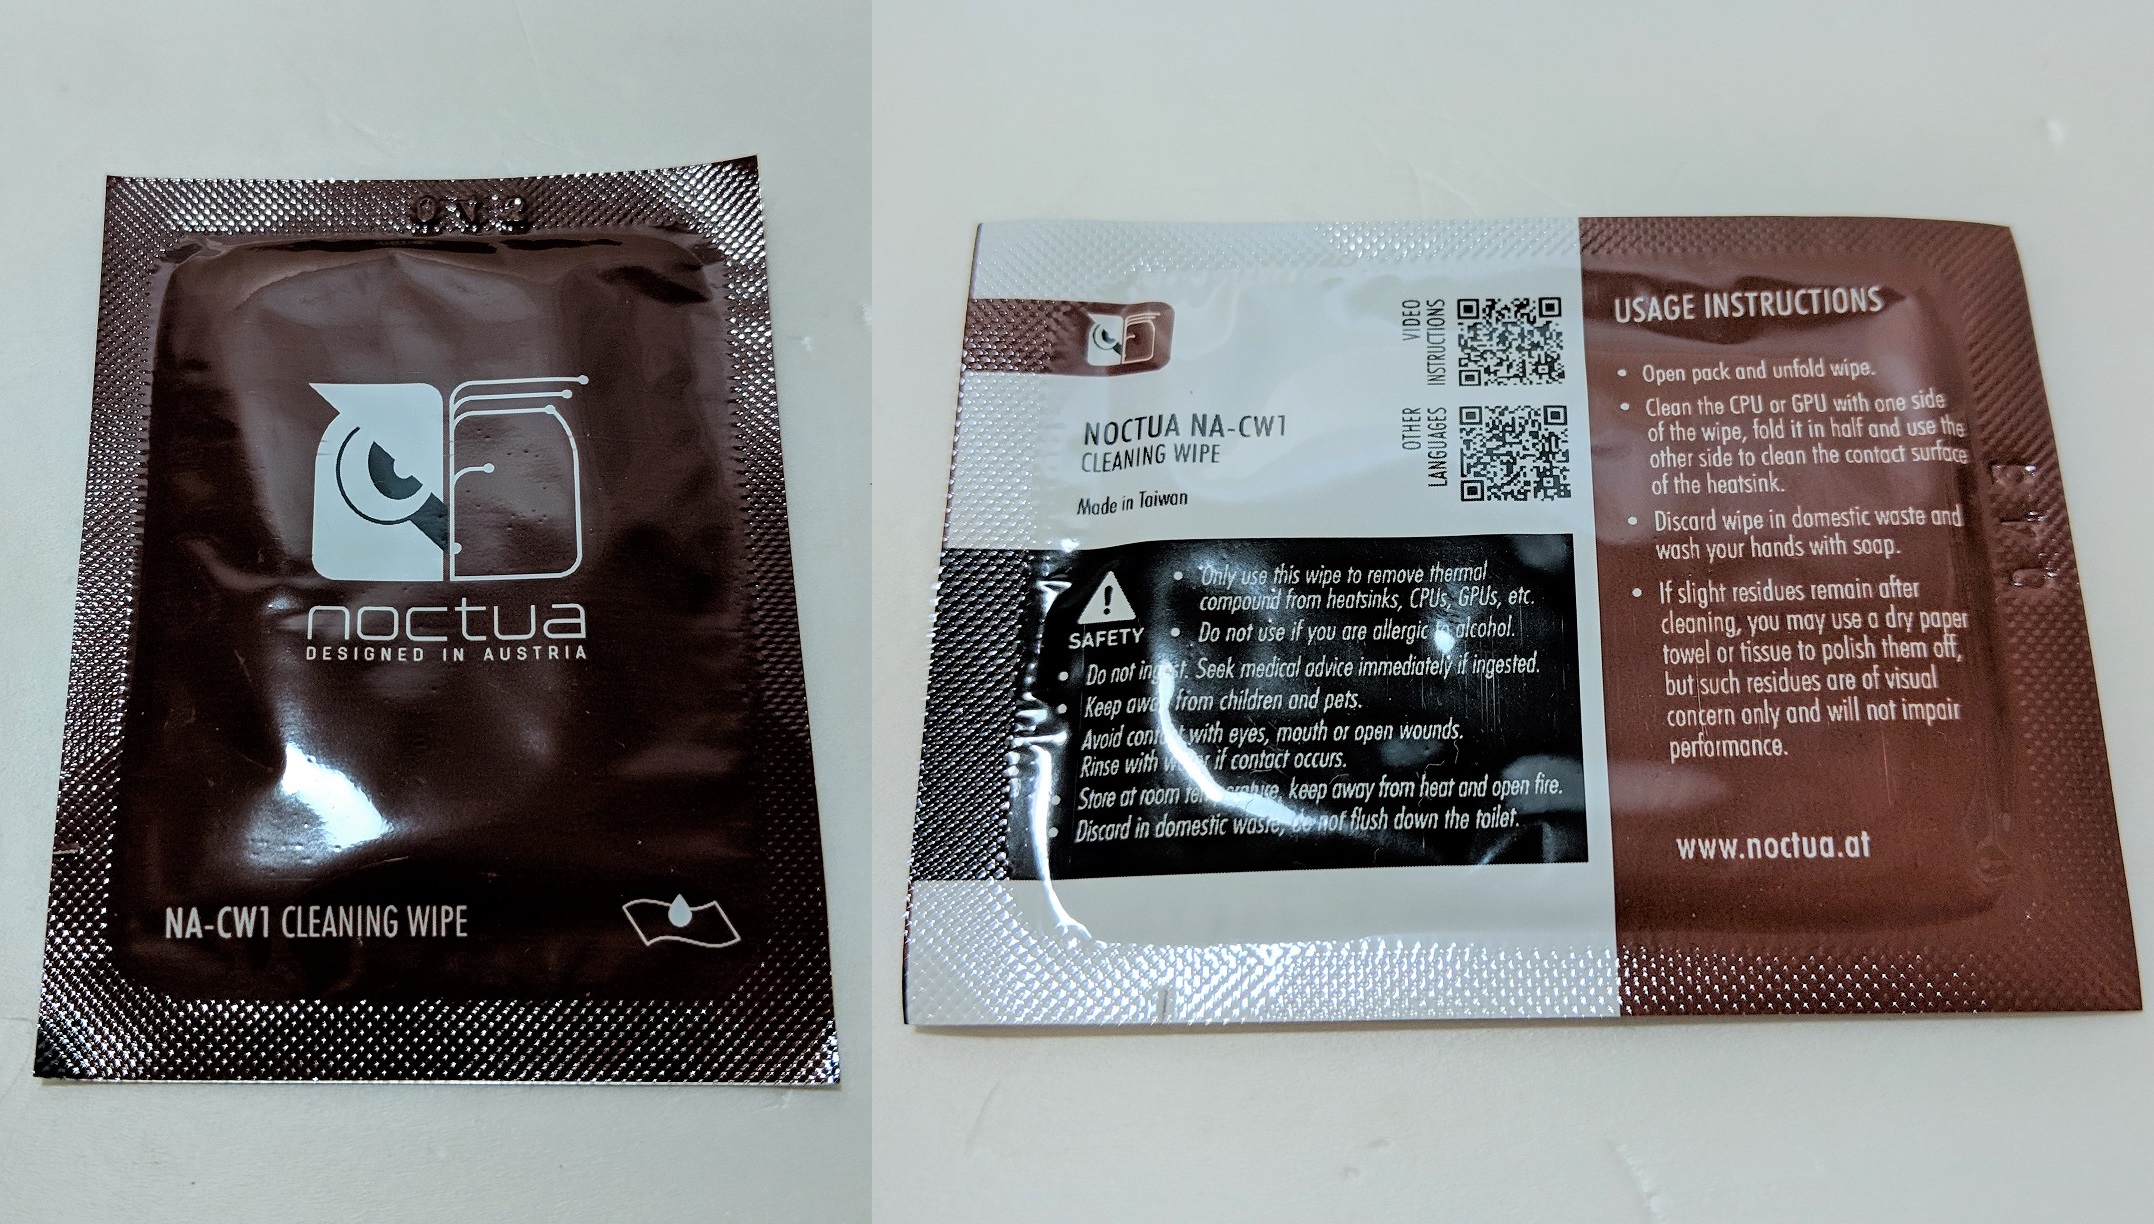 Noctua NA-SCW1 Cleaning Wipes